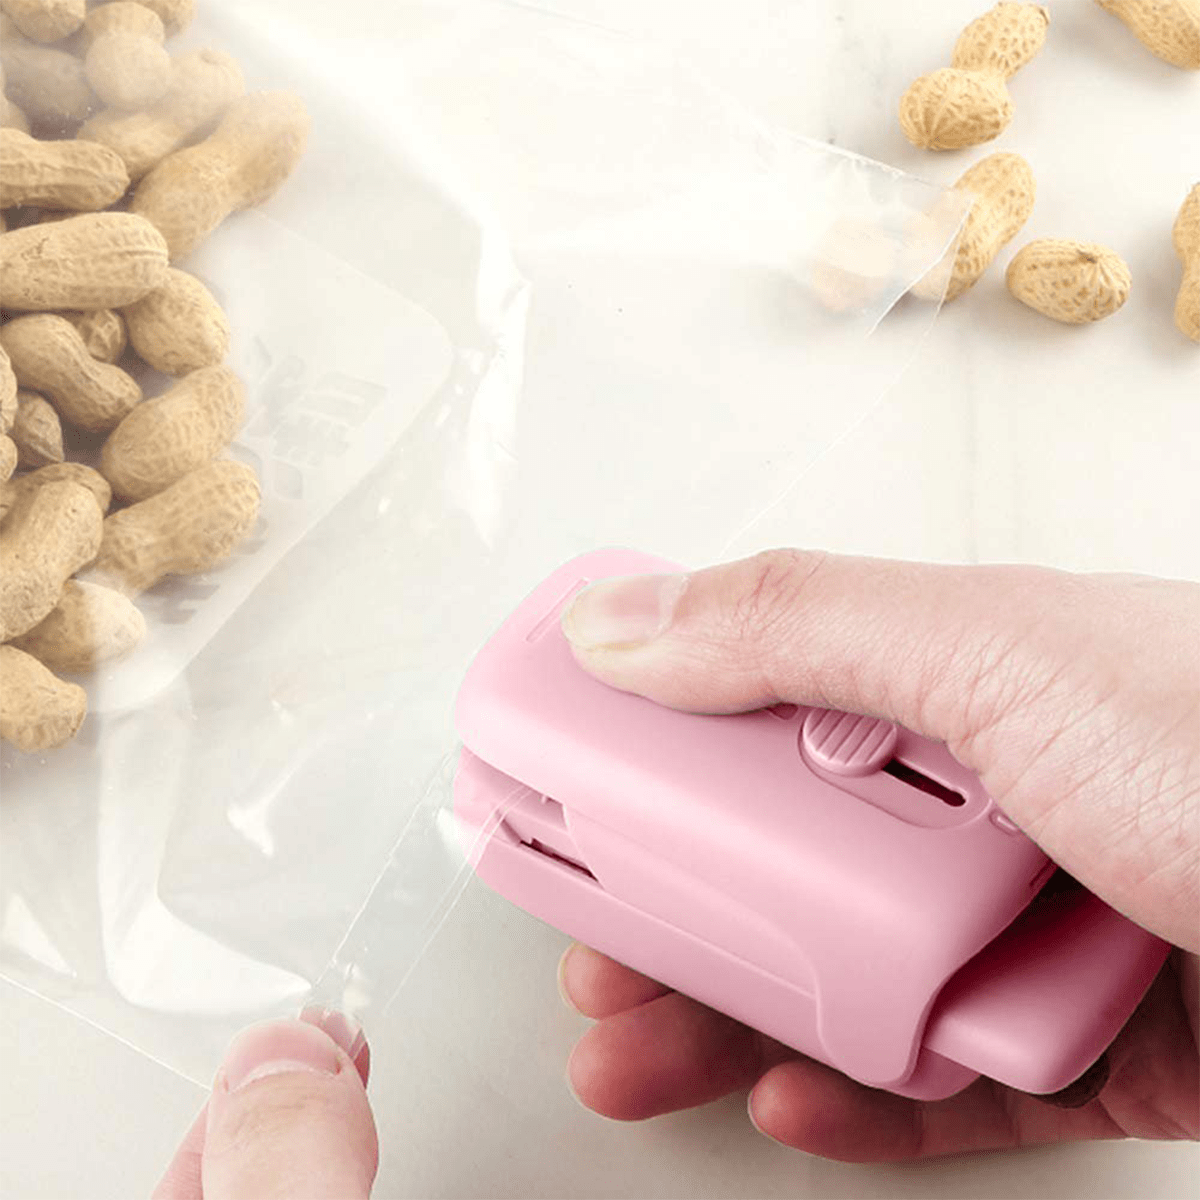 Portable Kitchen Storage Food Snack Seal Sealing Bag Clips Sealer Clamp  Plastic Tool Refrigerator Sticker Kitchen Accessories